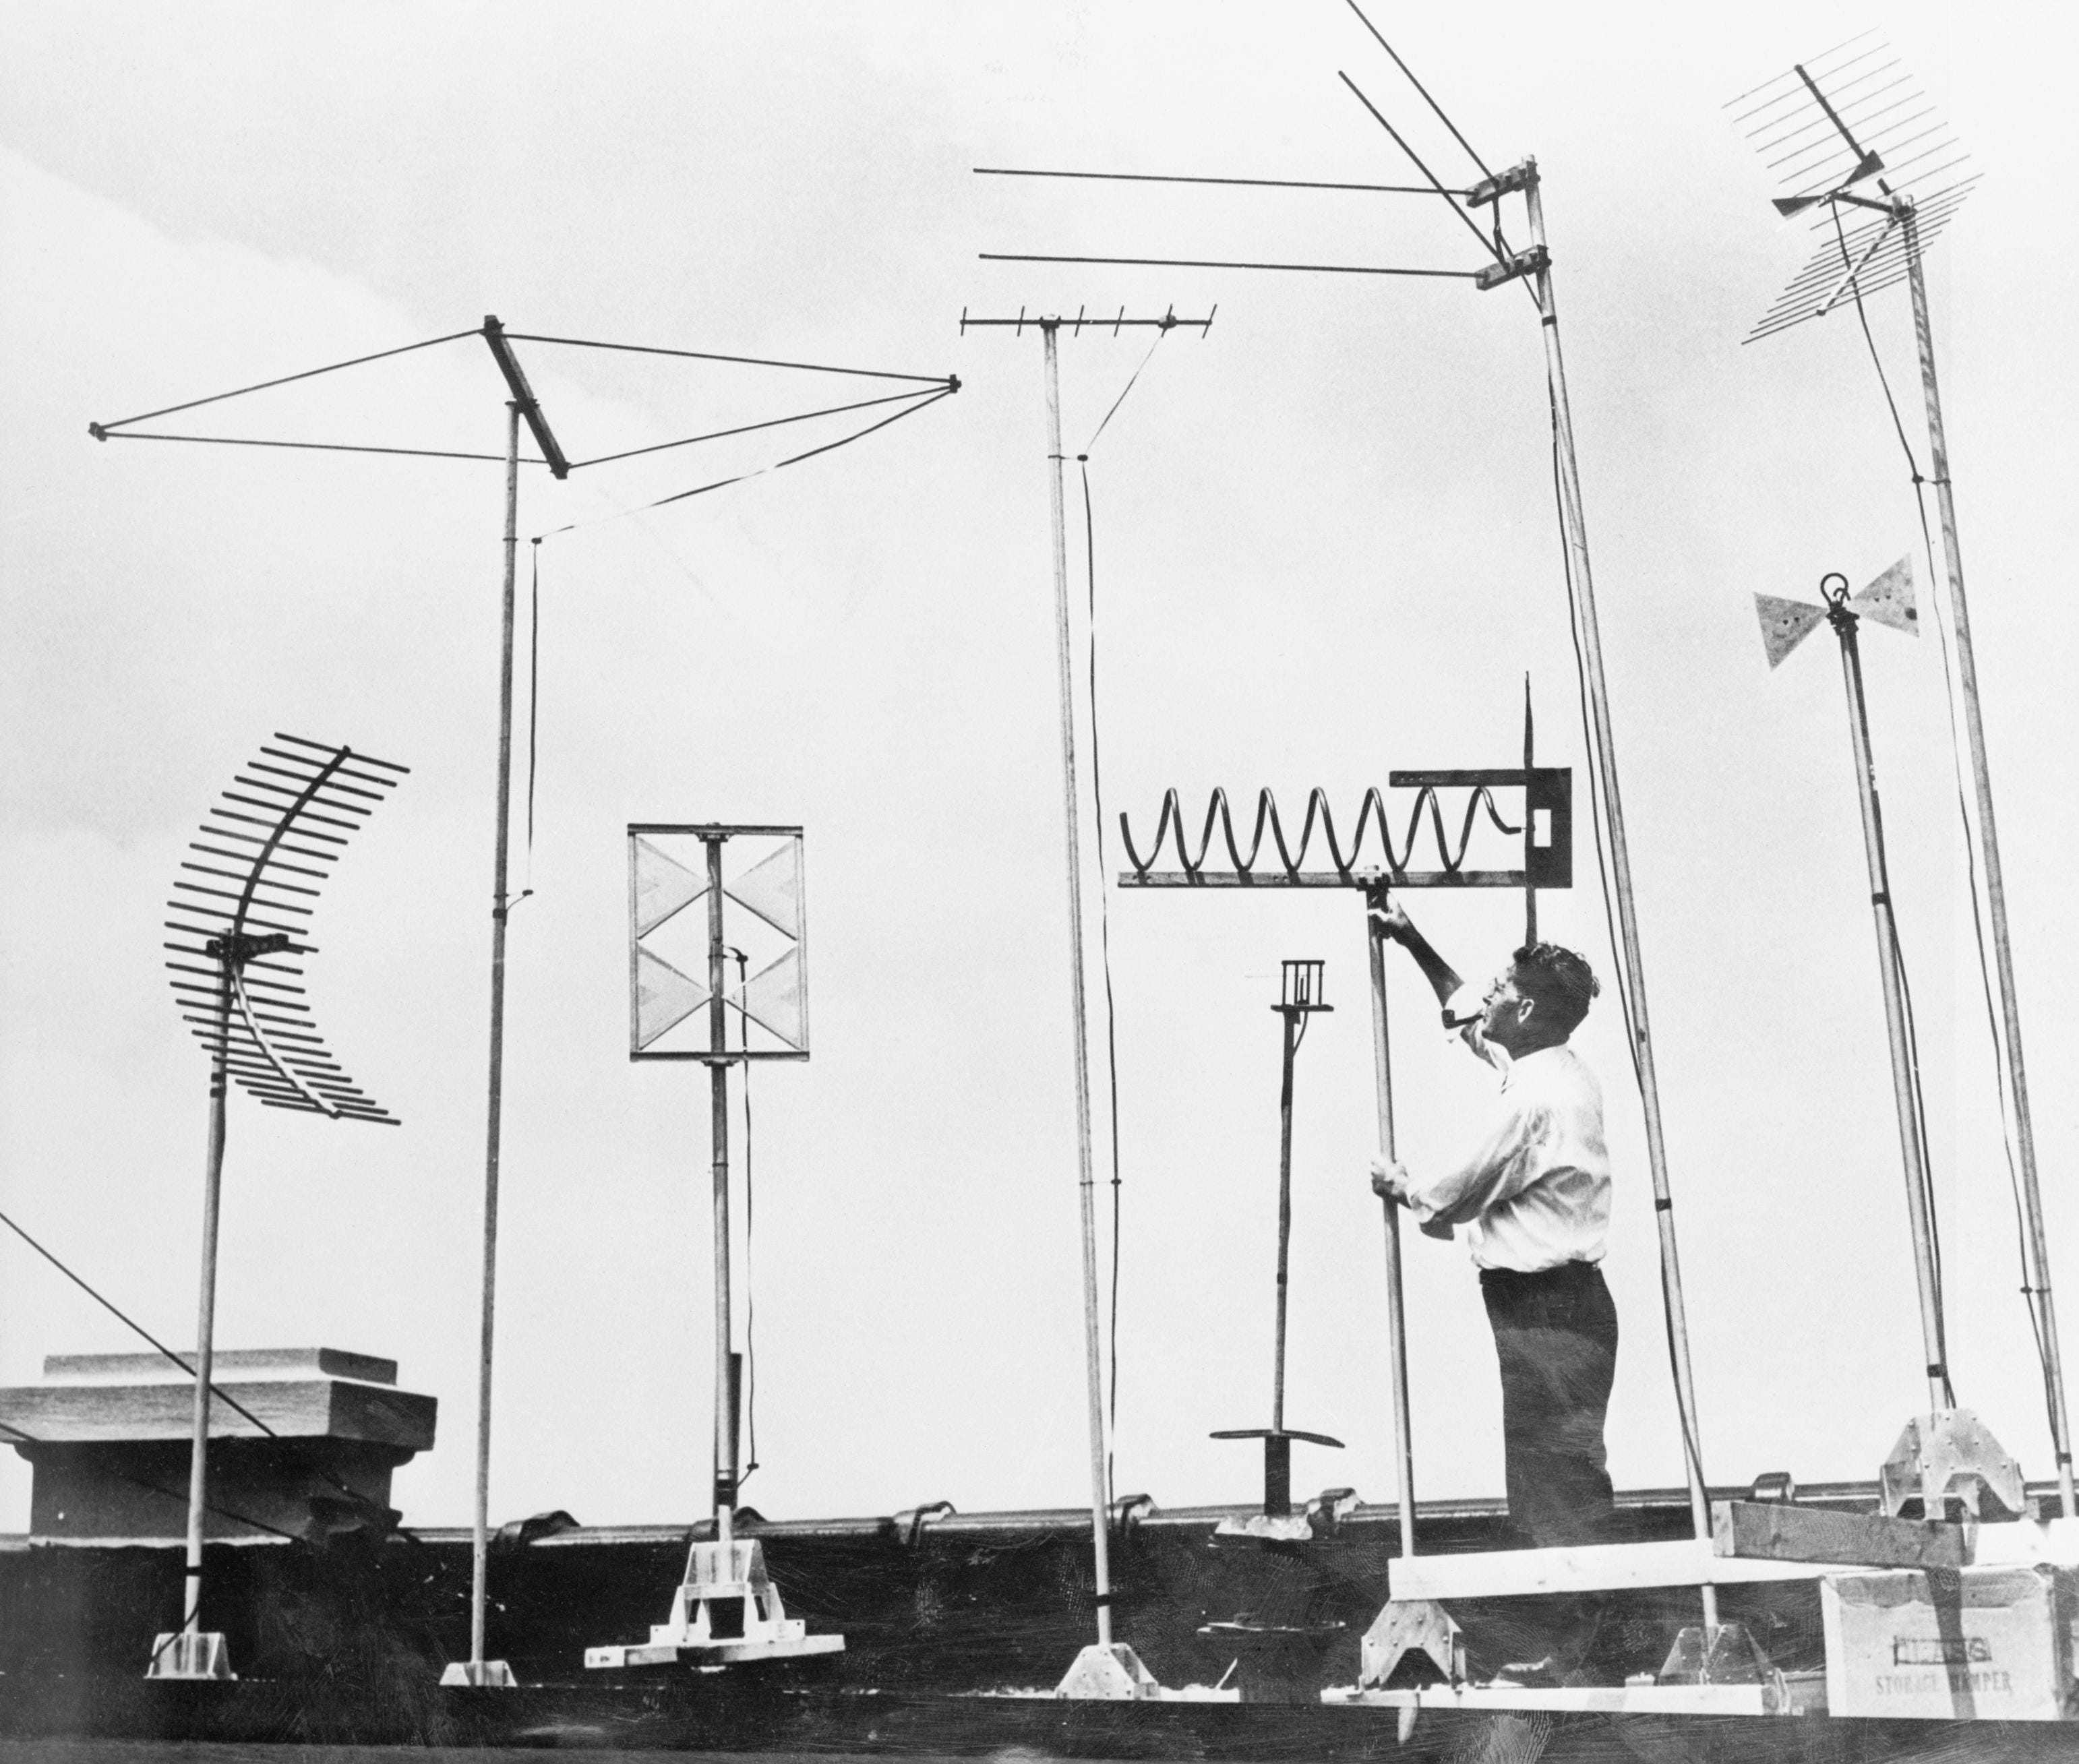 Technician Adjusting Television Antennae on Roof